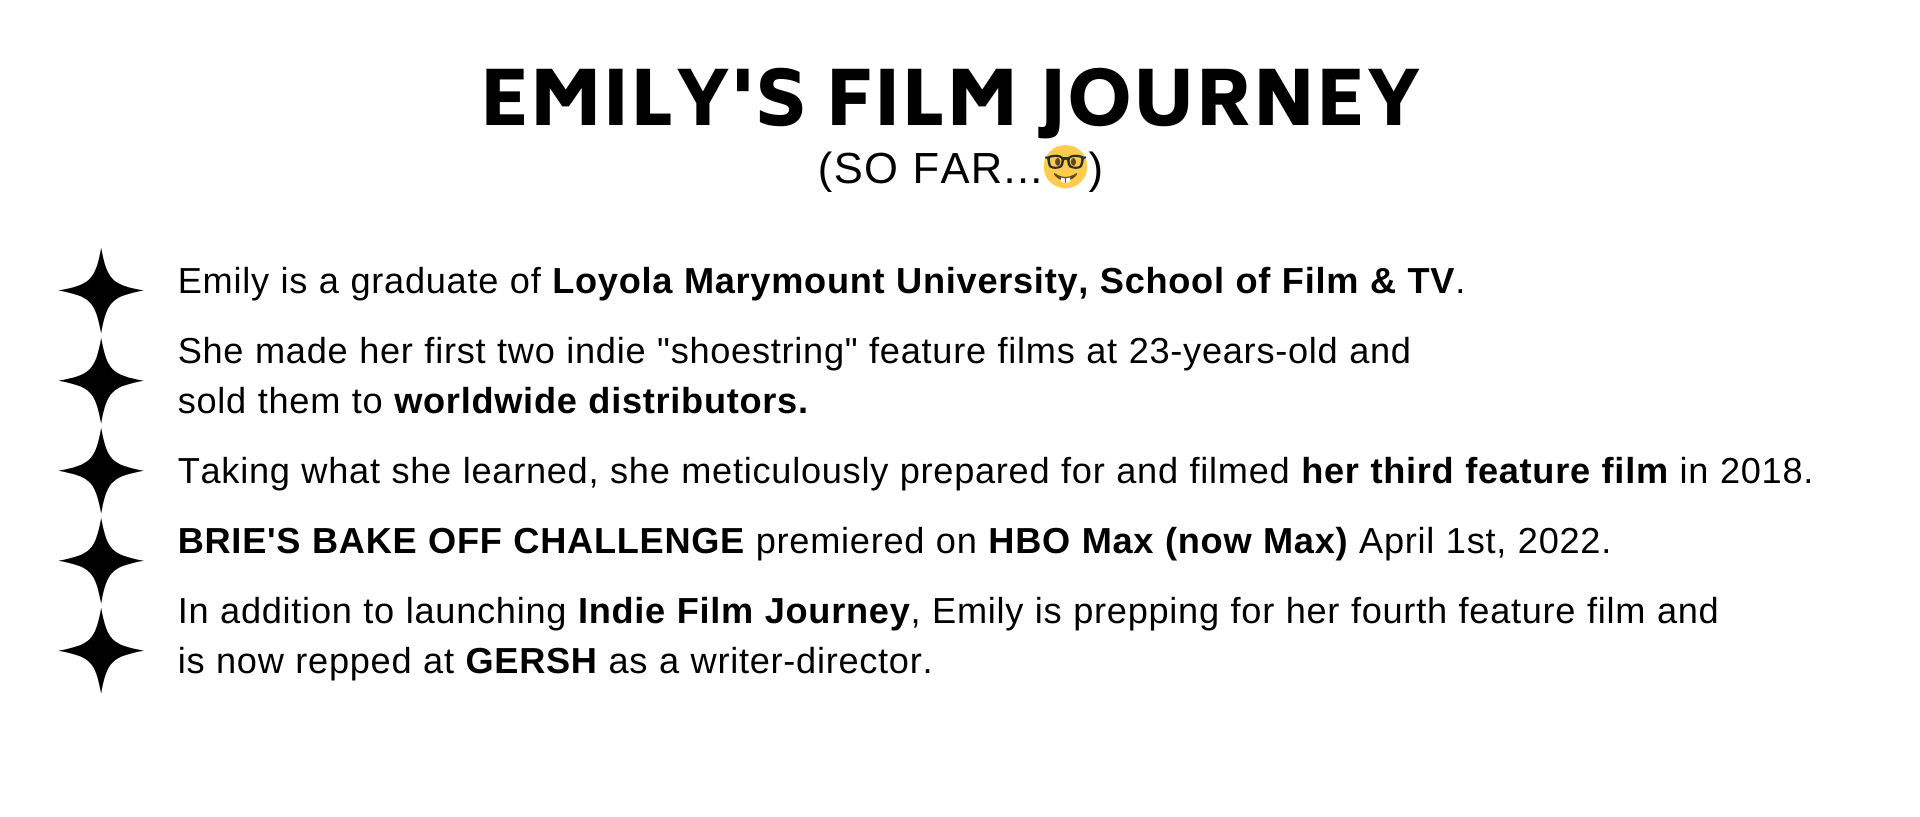 Emily is a graduate of Loyola Marymount University, School of Film &amp;amp; TV.  She made her first two indie shoestring feature films  at 23-years-old and sold them to worldwide distributors.   Taking what she learned, she meticulously prepared for and filmed her third feature film in 2018.  BRIES BAKE OFF CHALLENGE premiered on HBO Max April 1st, 2022.  In addition to launching Indie Film Journey, Emily is prepping for her fourth feature film.